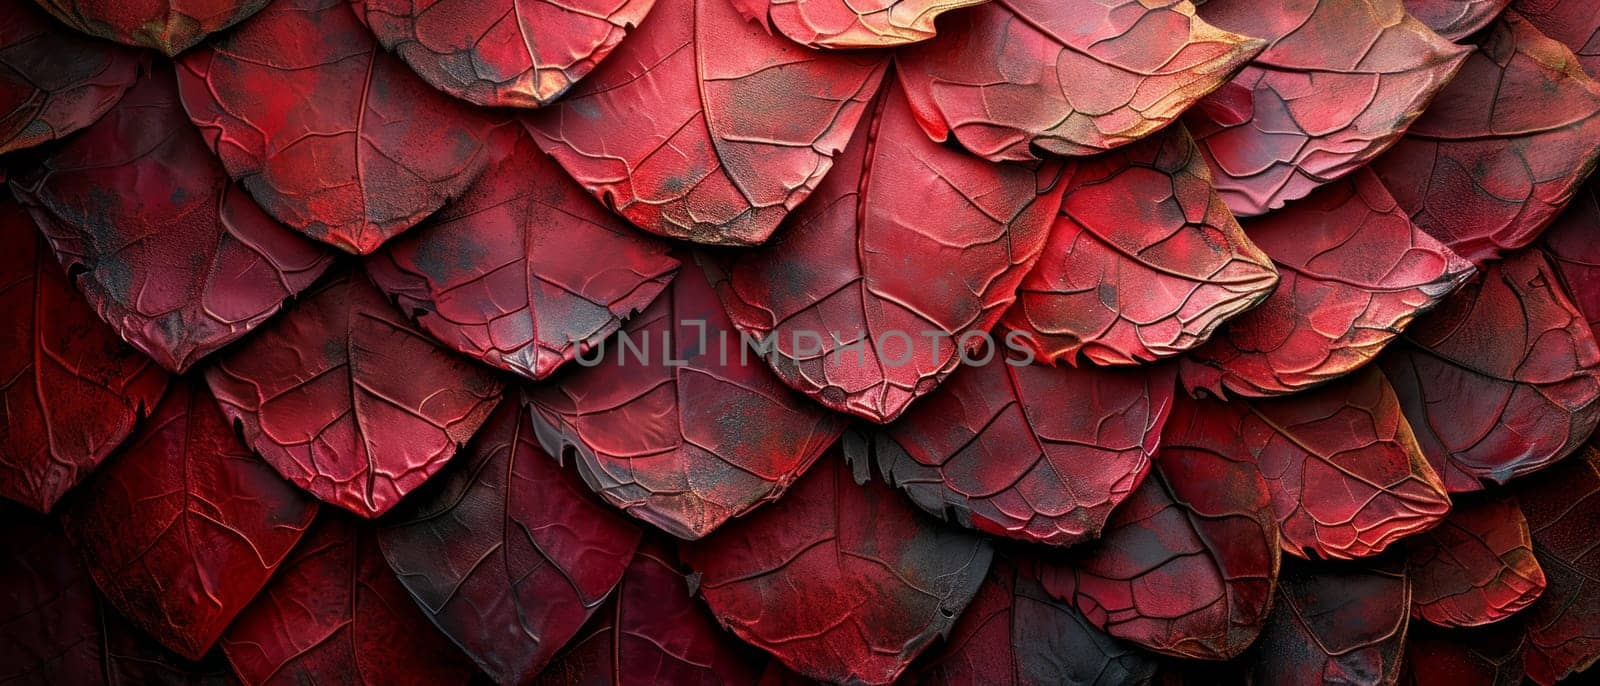 Vivid red snake skin texture with detailed scale patterns. by sfinks